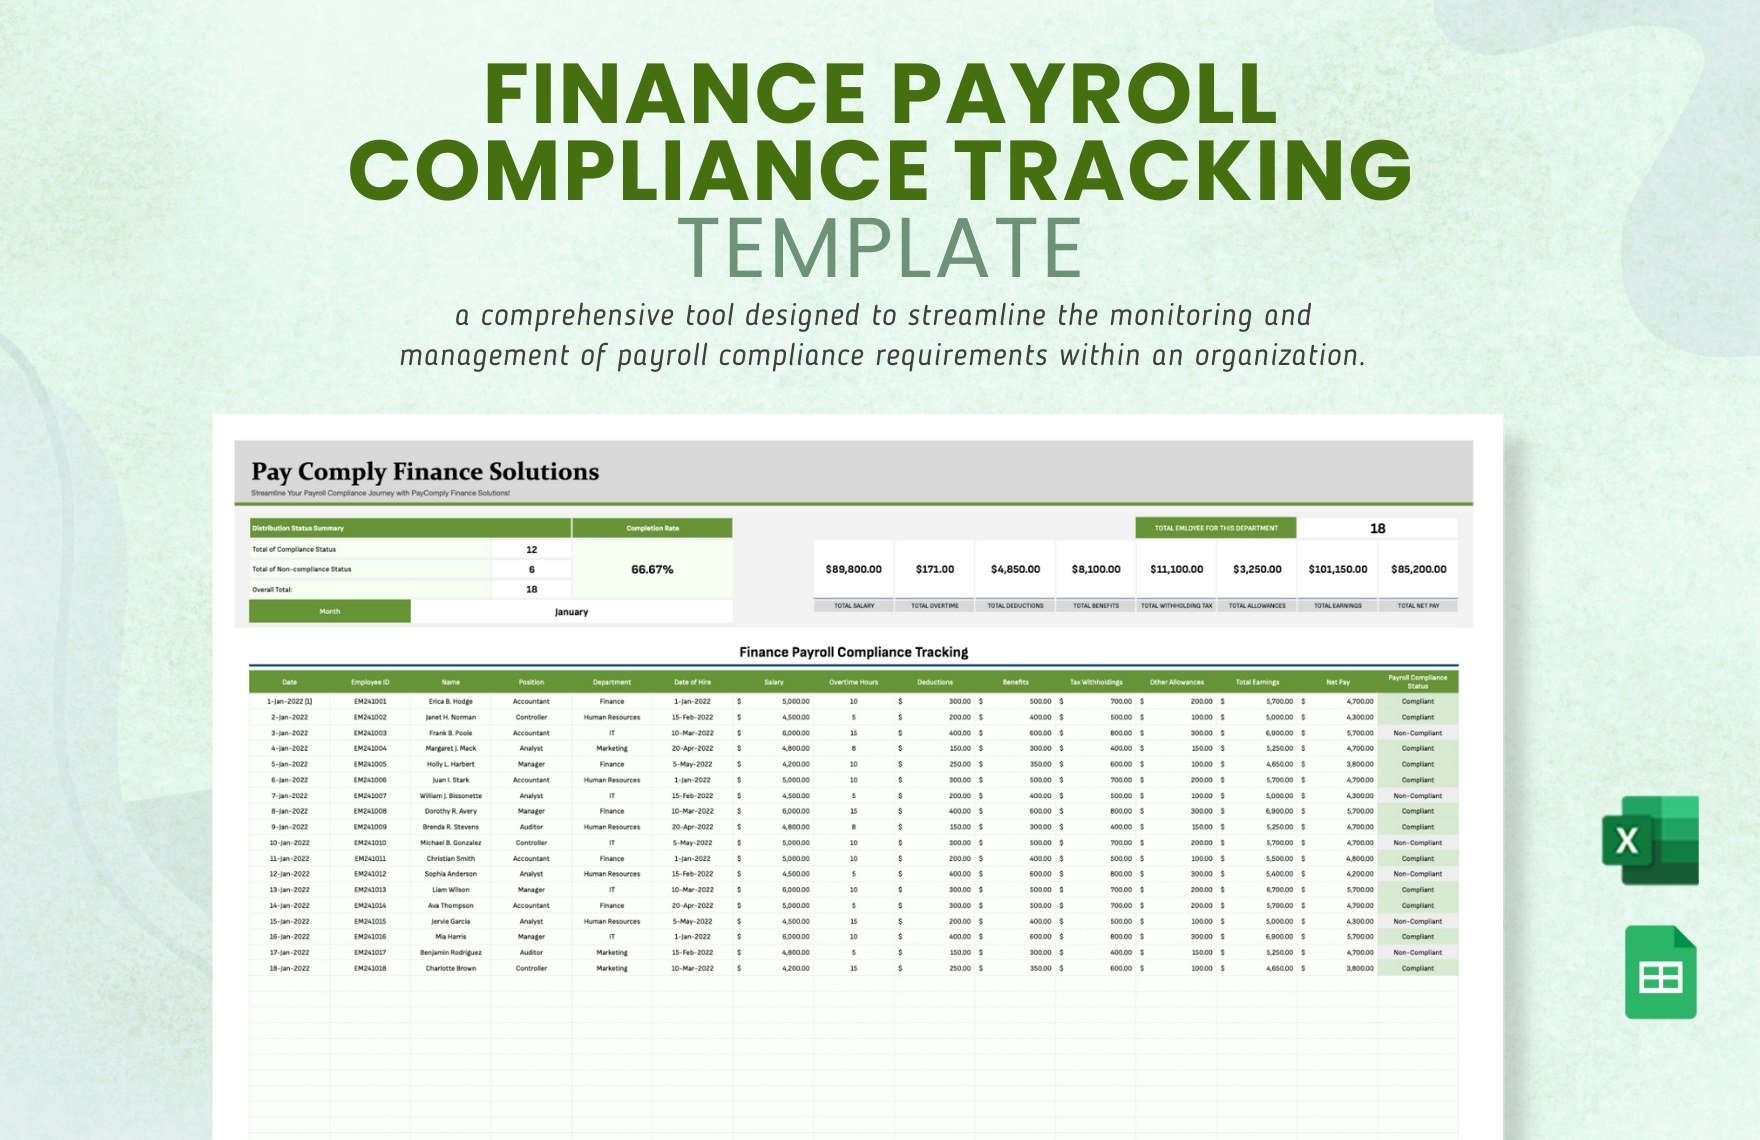 Finance Payroll Compliance Tracking Template in Excel, Google Sheets